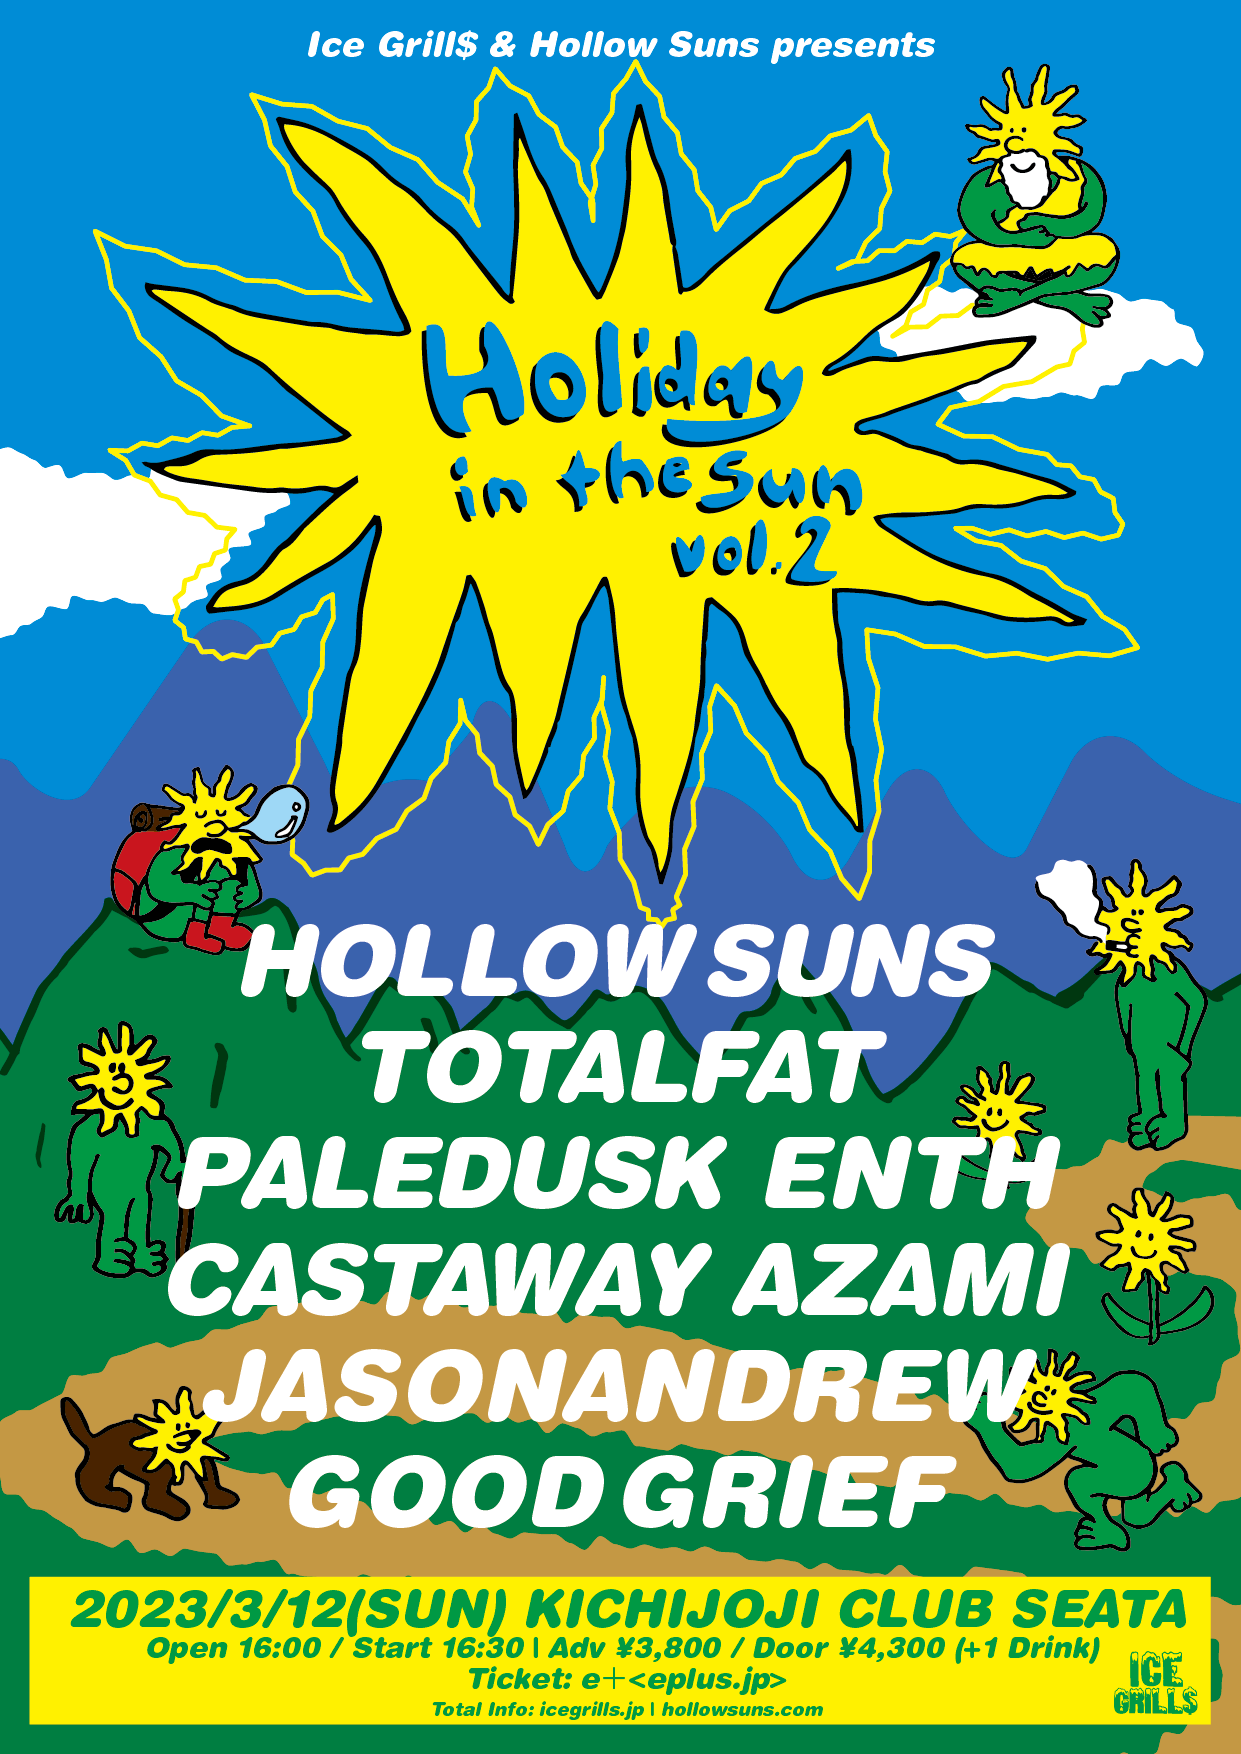 ICE GRILL$ & Hollow Suns Presents “Holiday in the Sun vol.2”